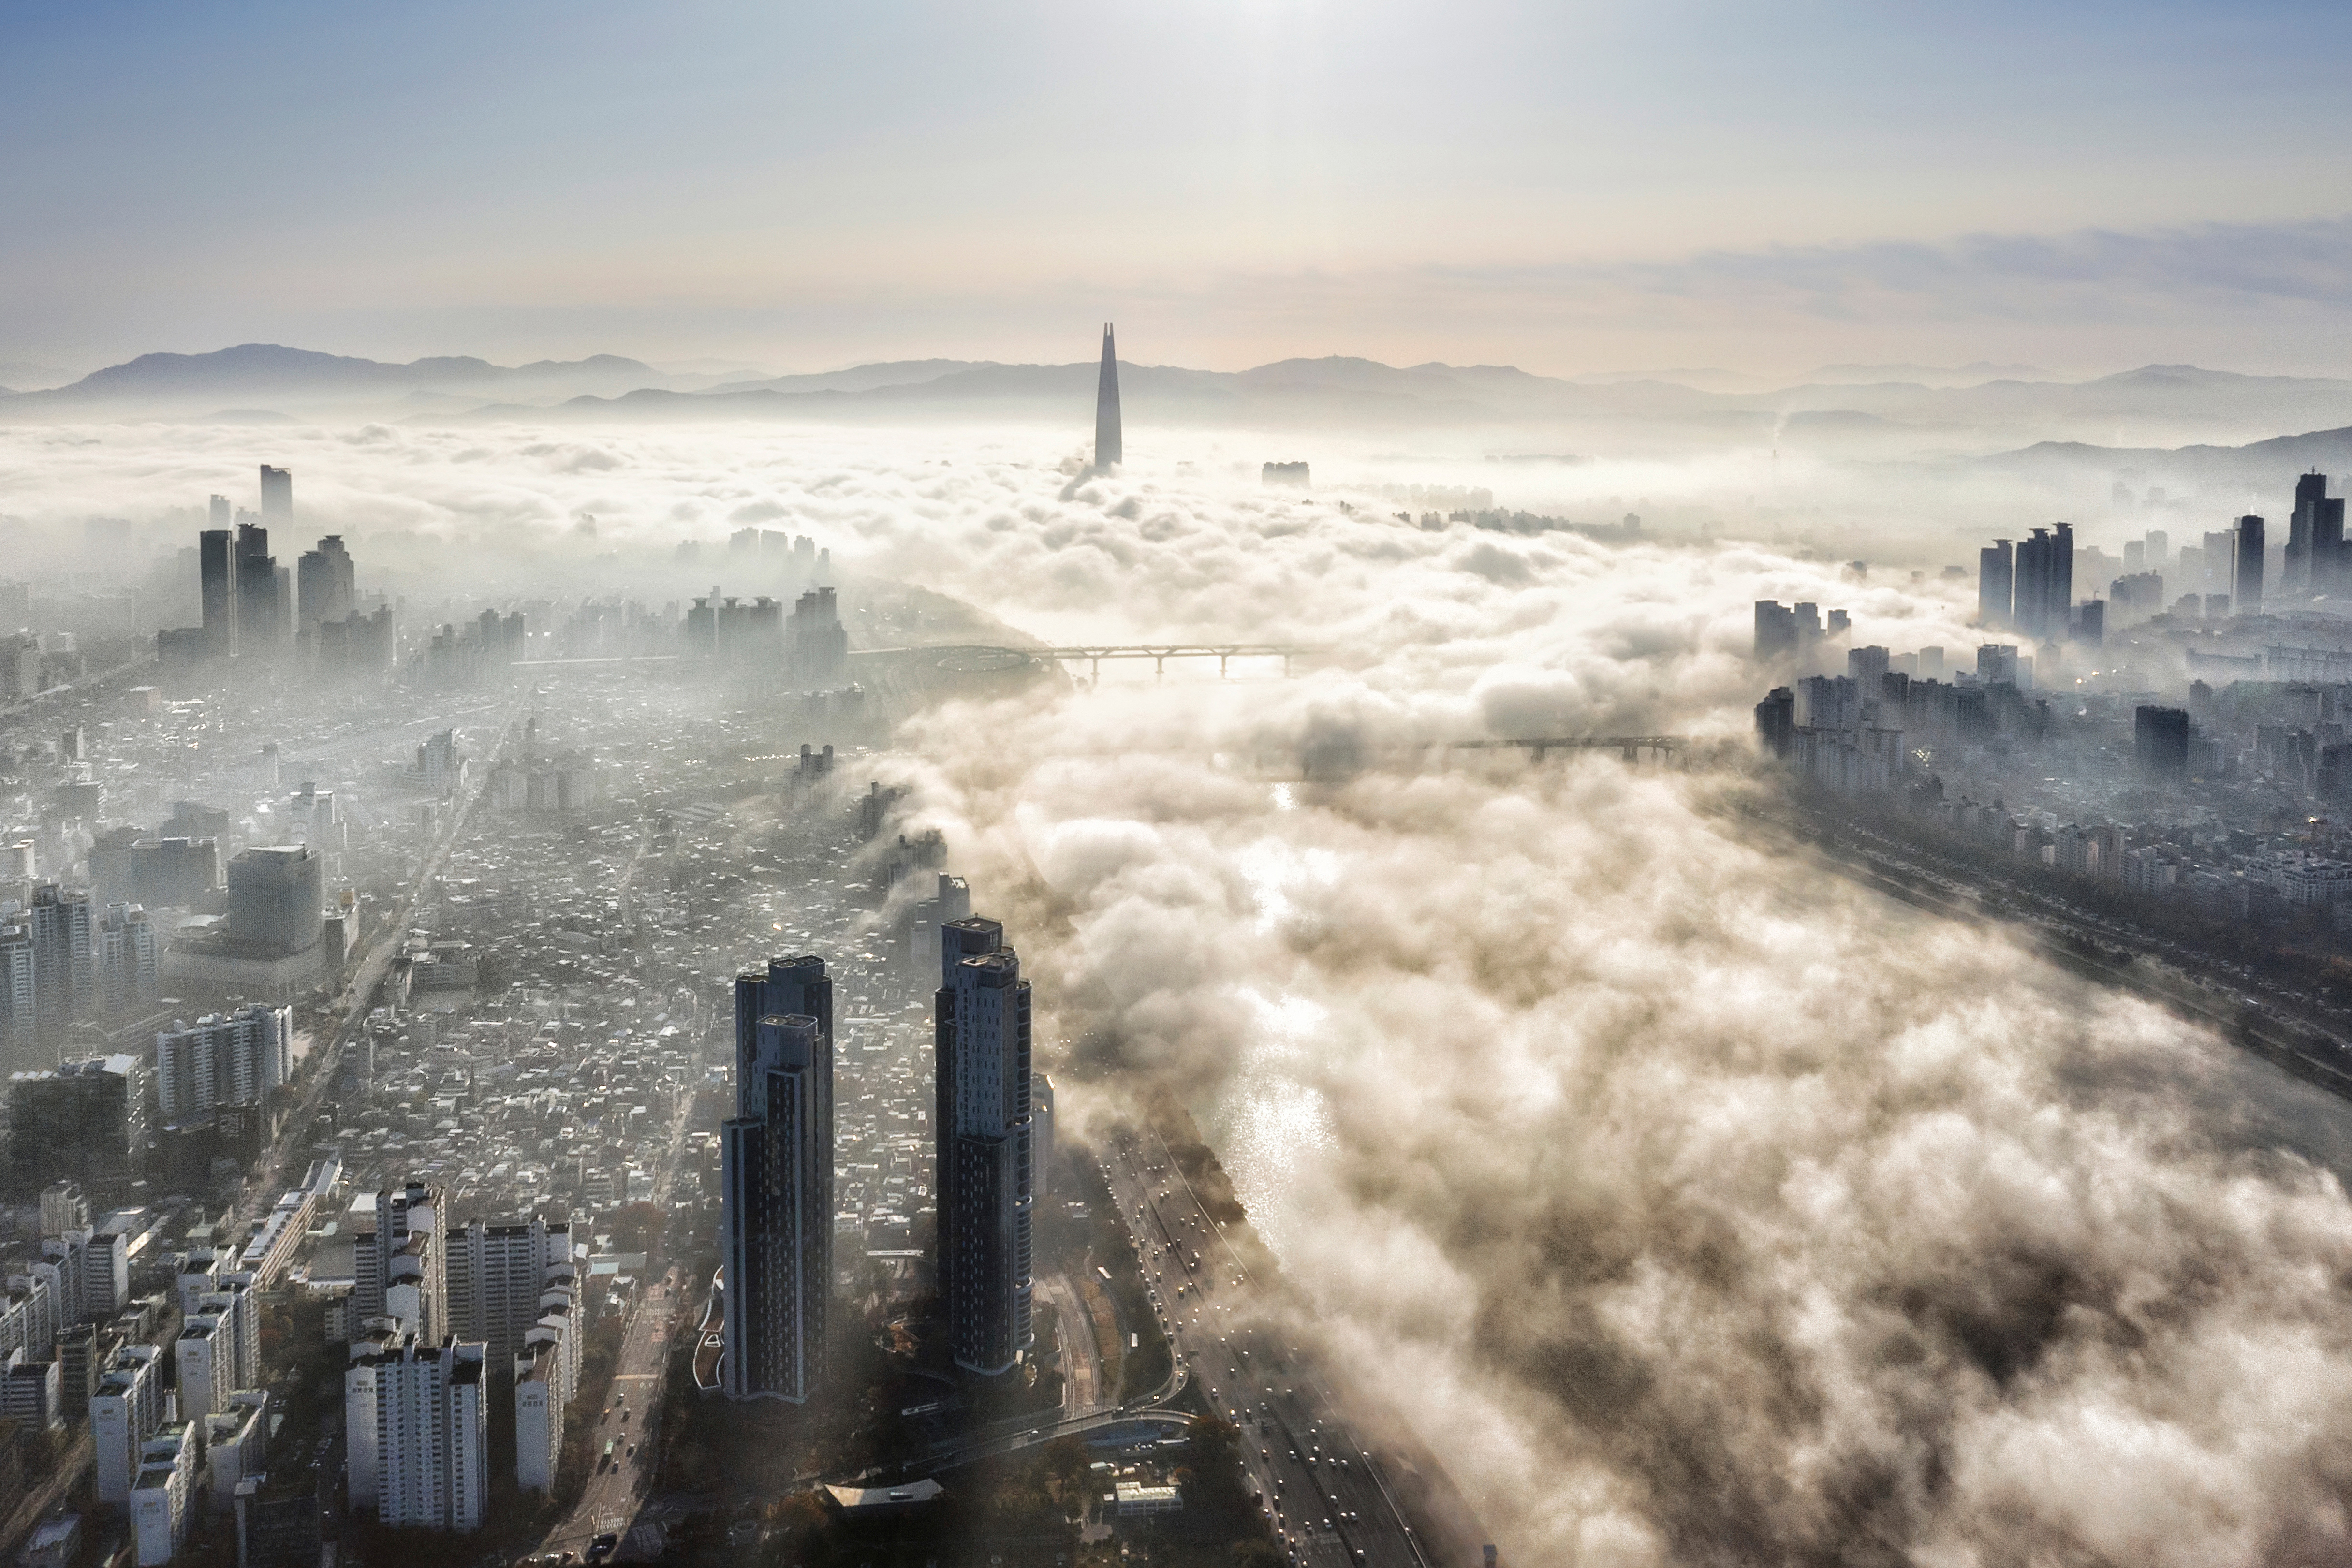 View of a city covered in clouds from above